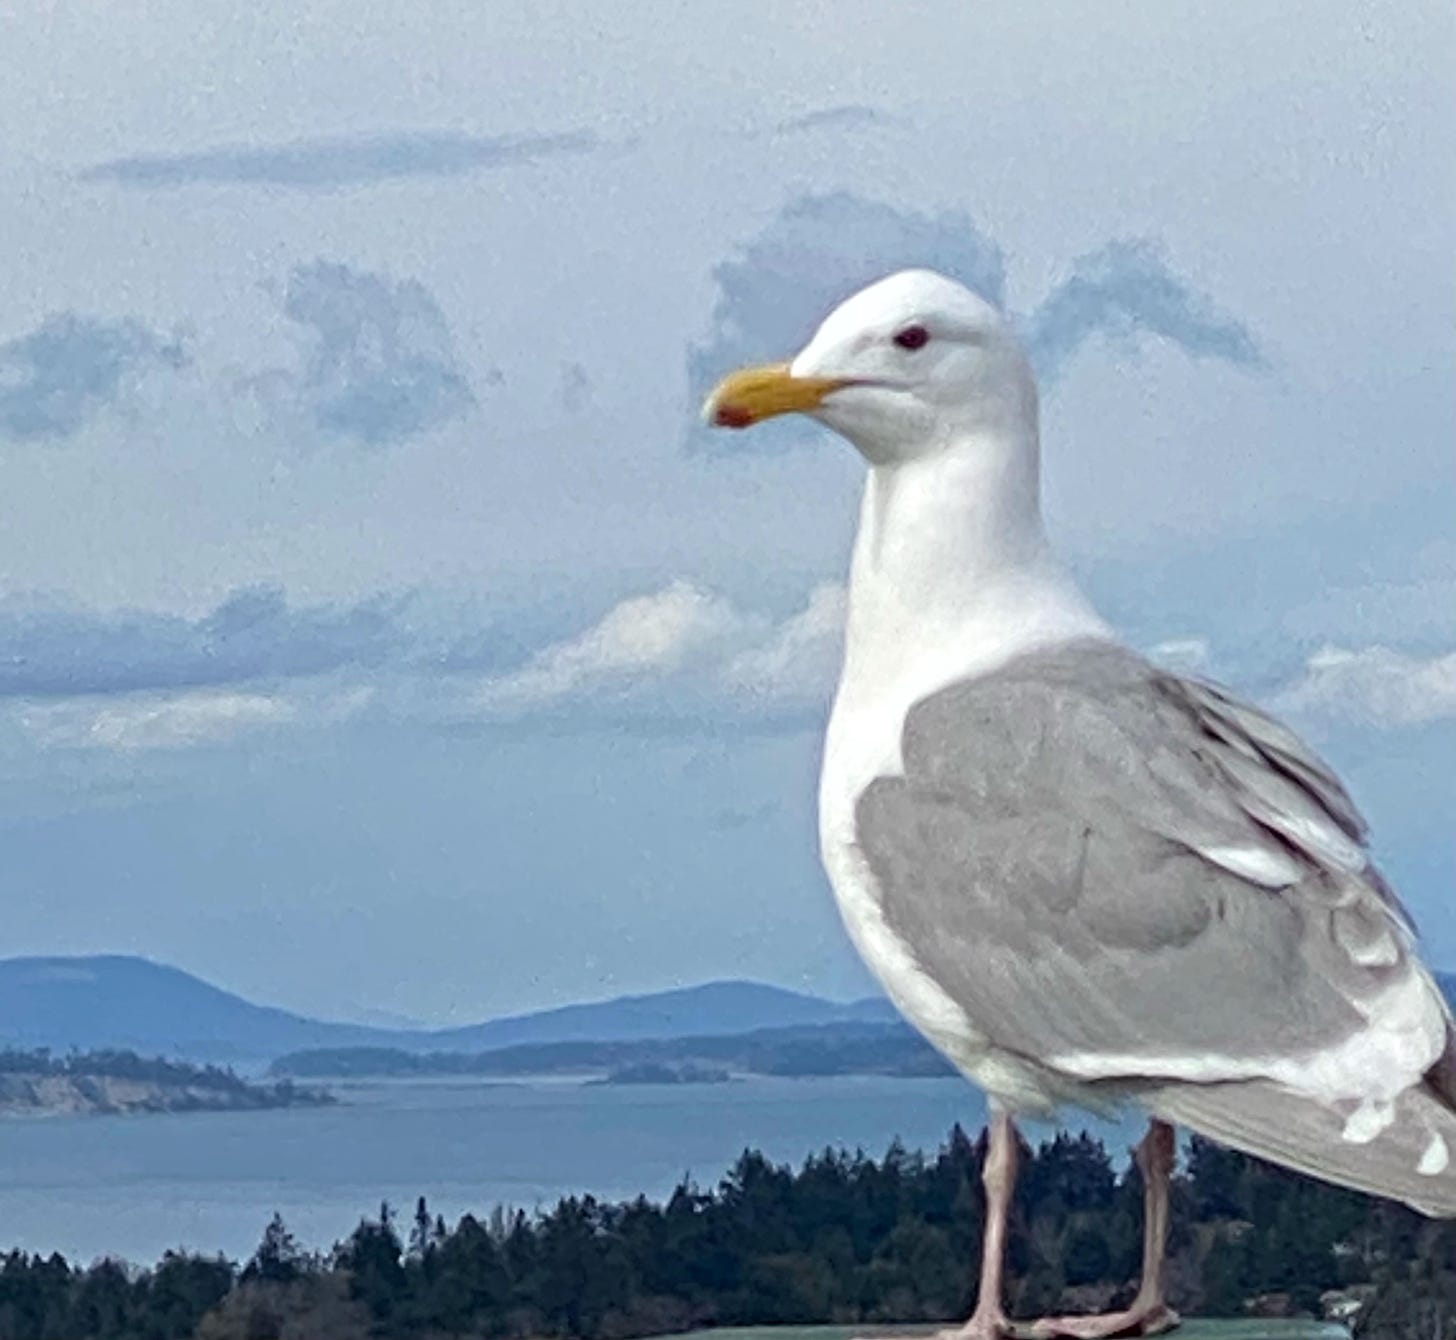 A gull with ocean in background